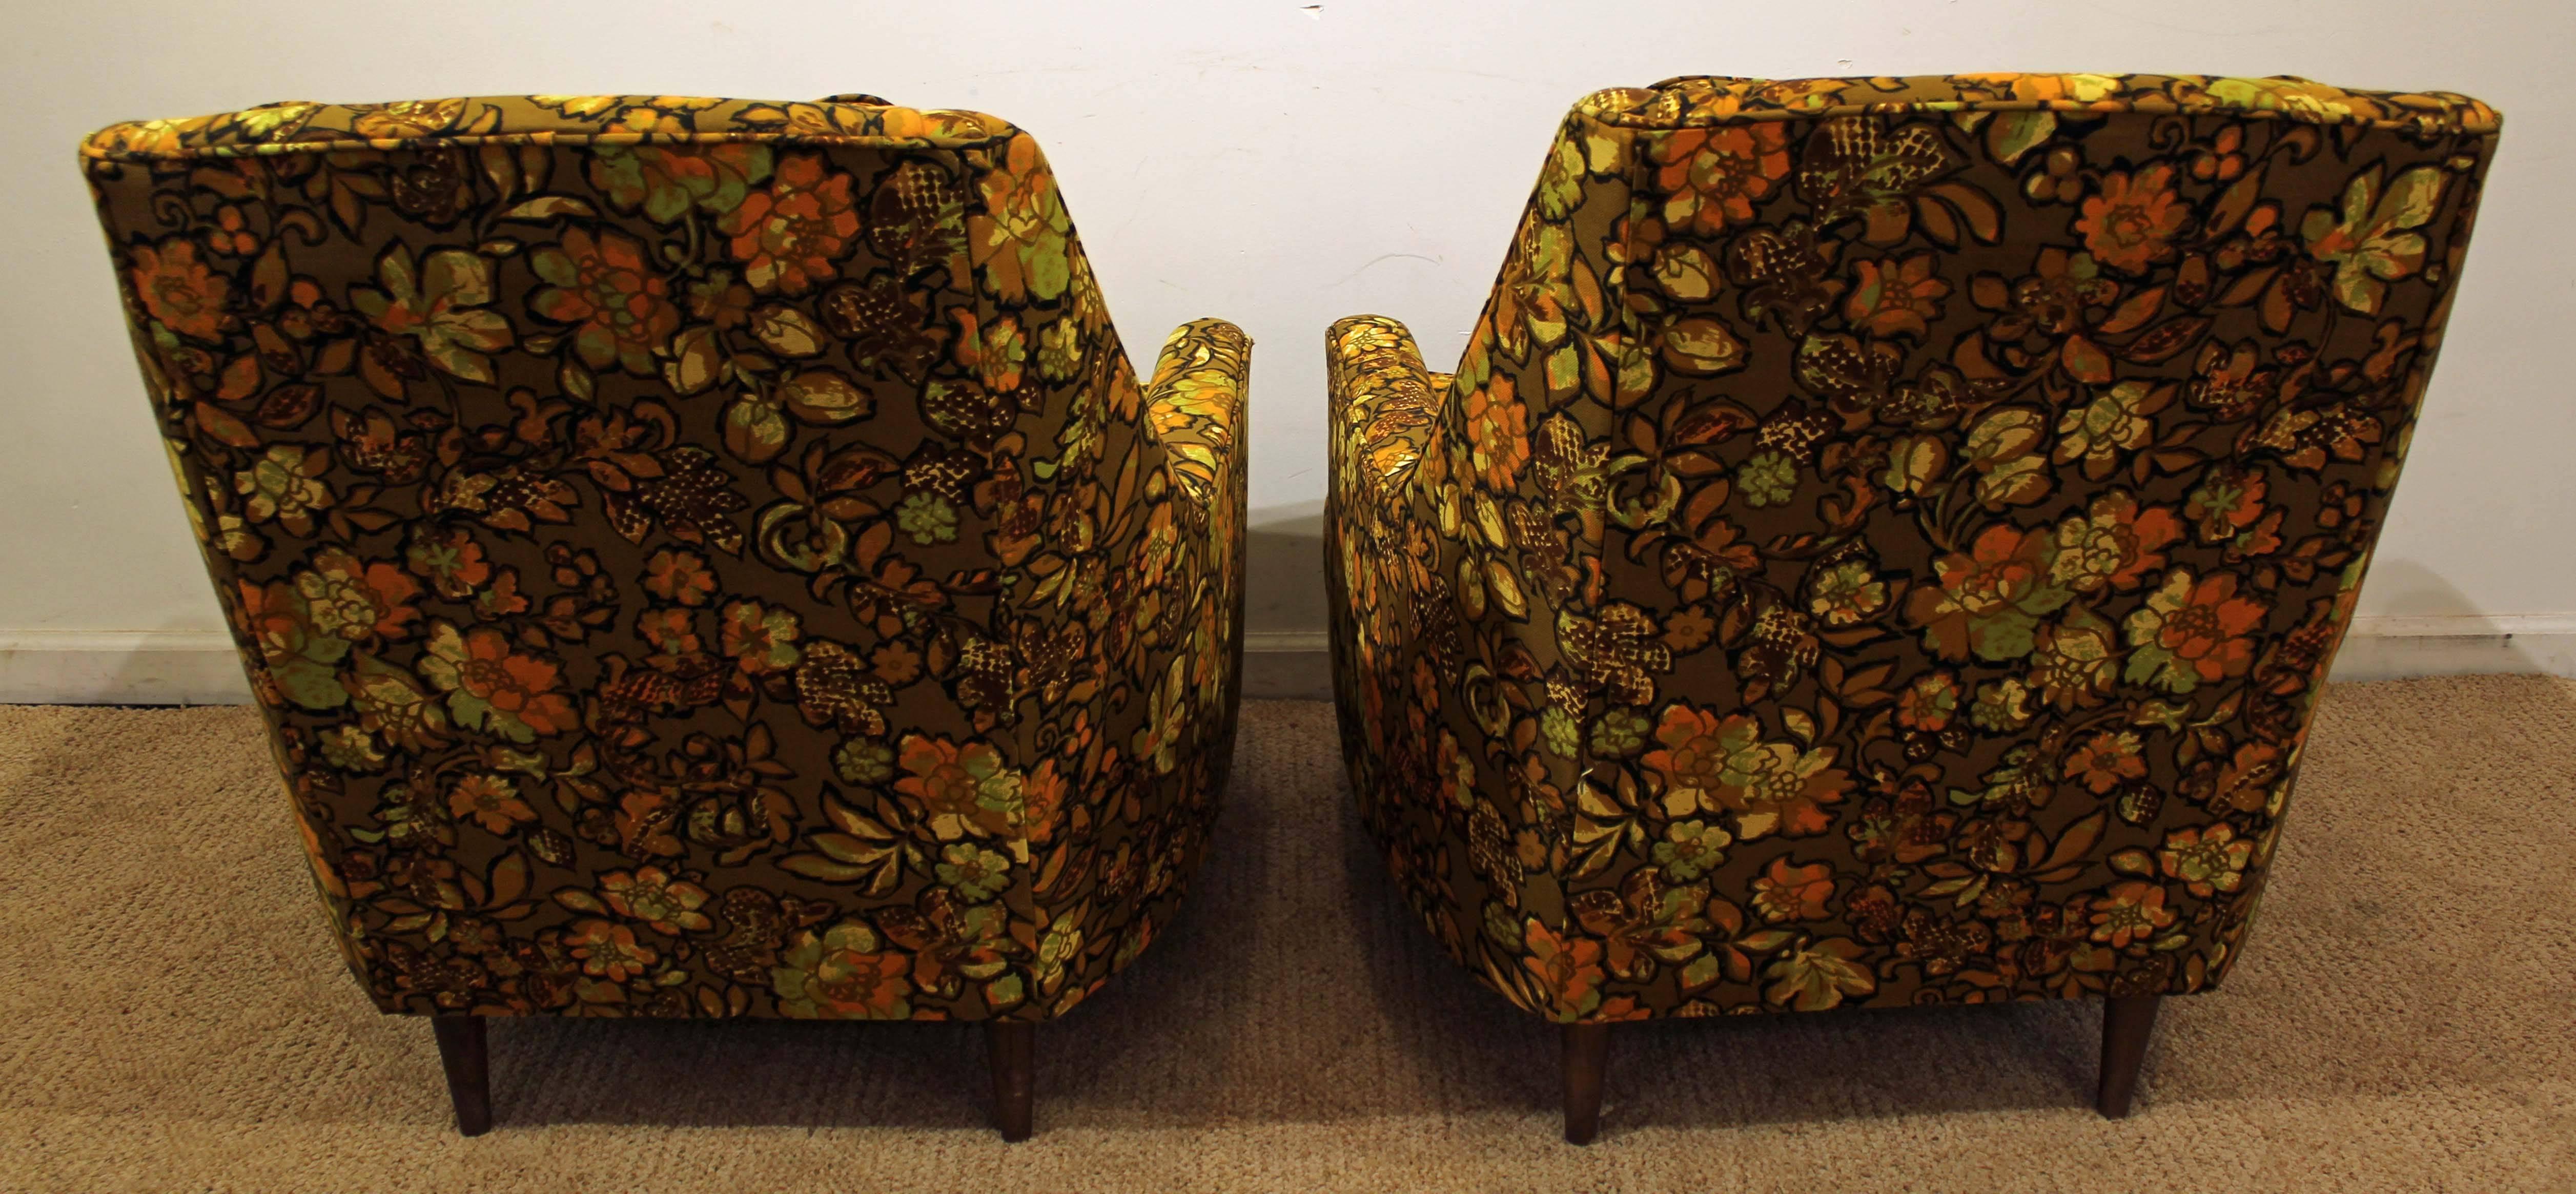 20th Century Mid-Century Modern Three-Piece Floral Lounge Chair and Ottoman Set